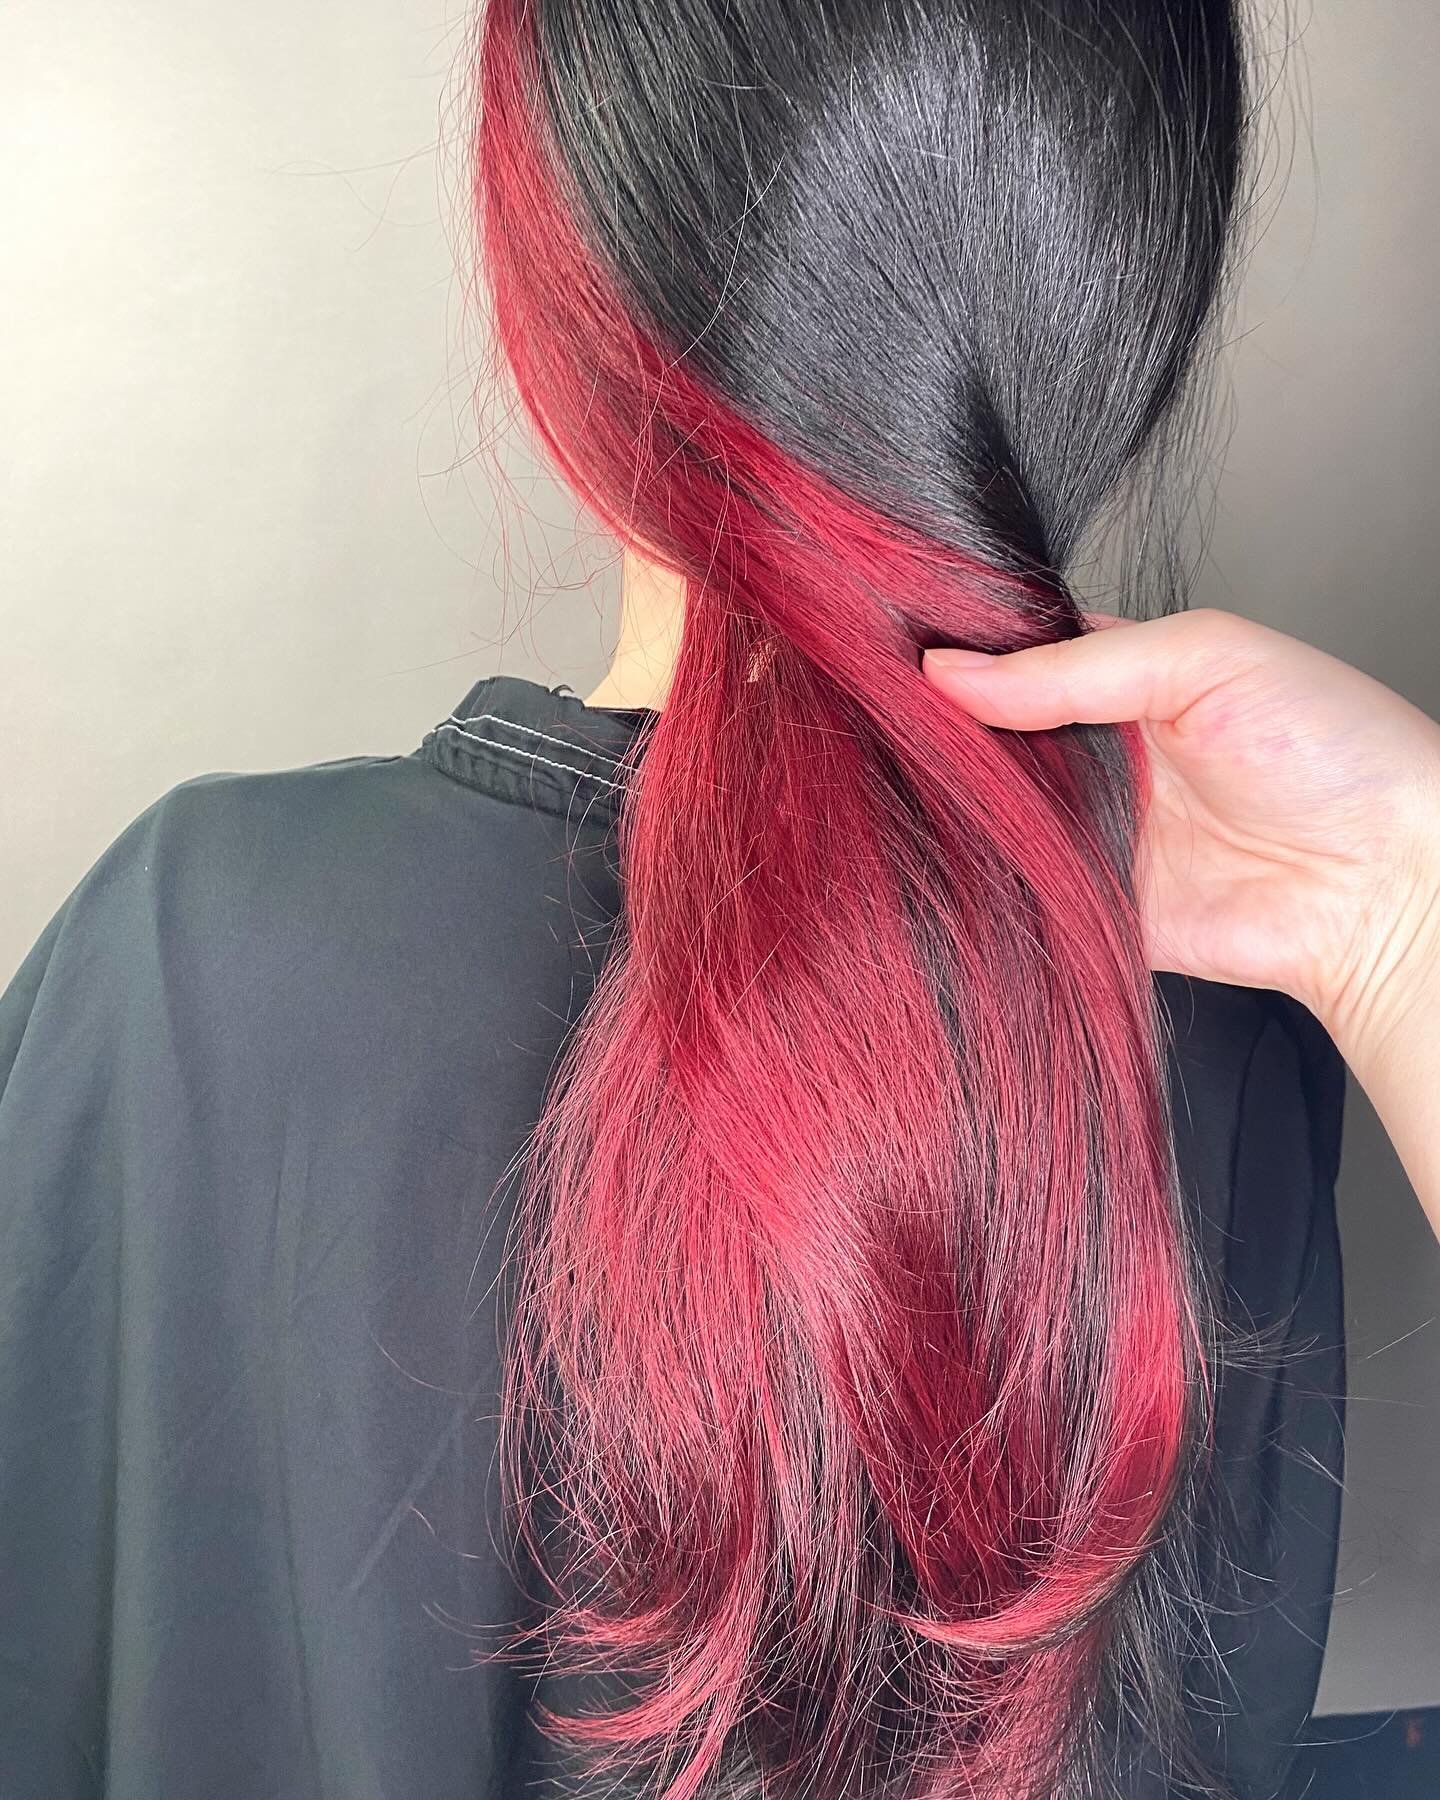 Red Halo color 
.
.
.
A halo color means it goes all the way around the hairline giving you different looks when parting or putting your hair up!